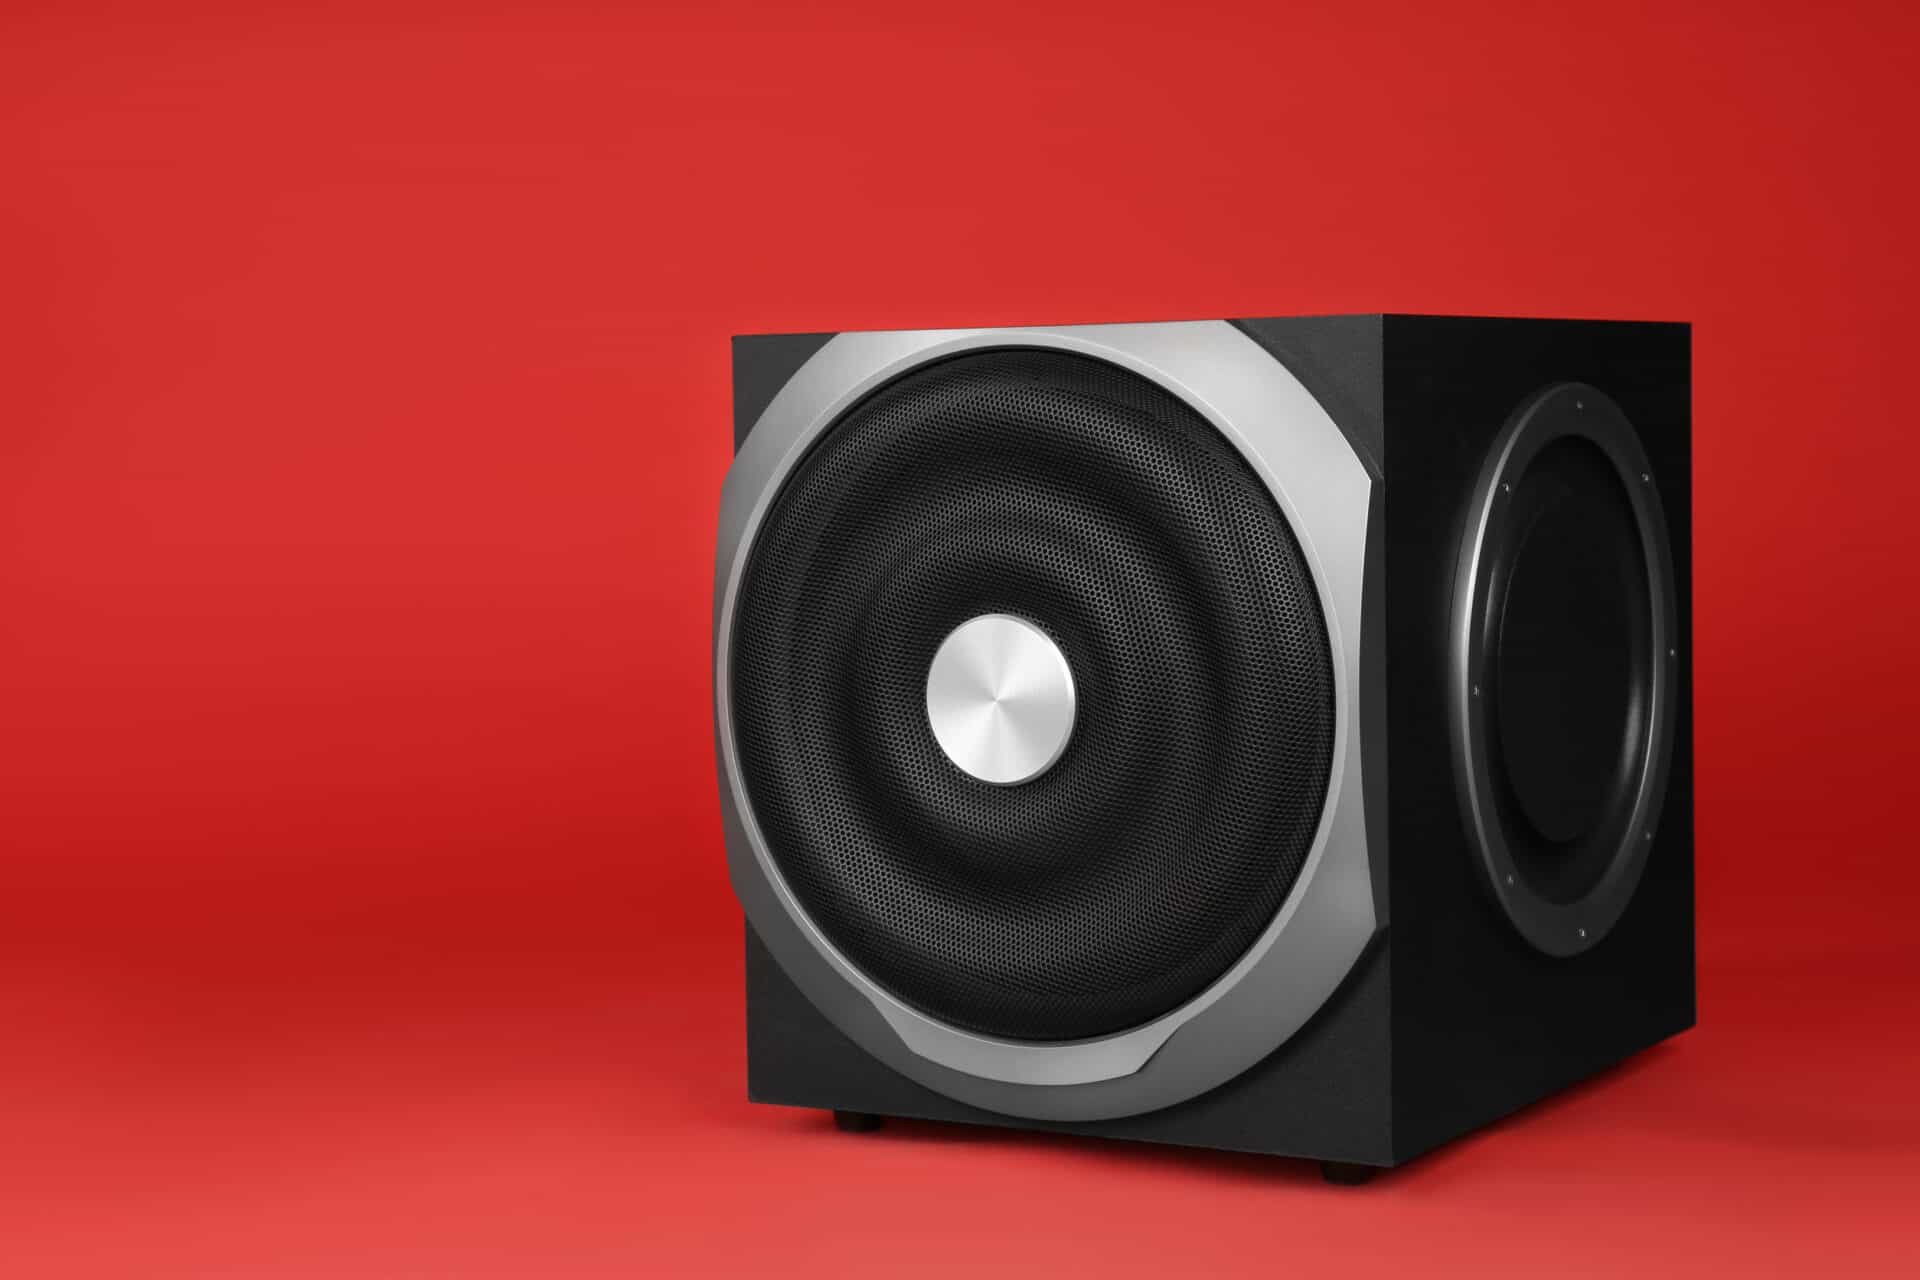 Can You Use a Passive Subwoofer With an AV Receiver